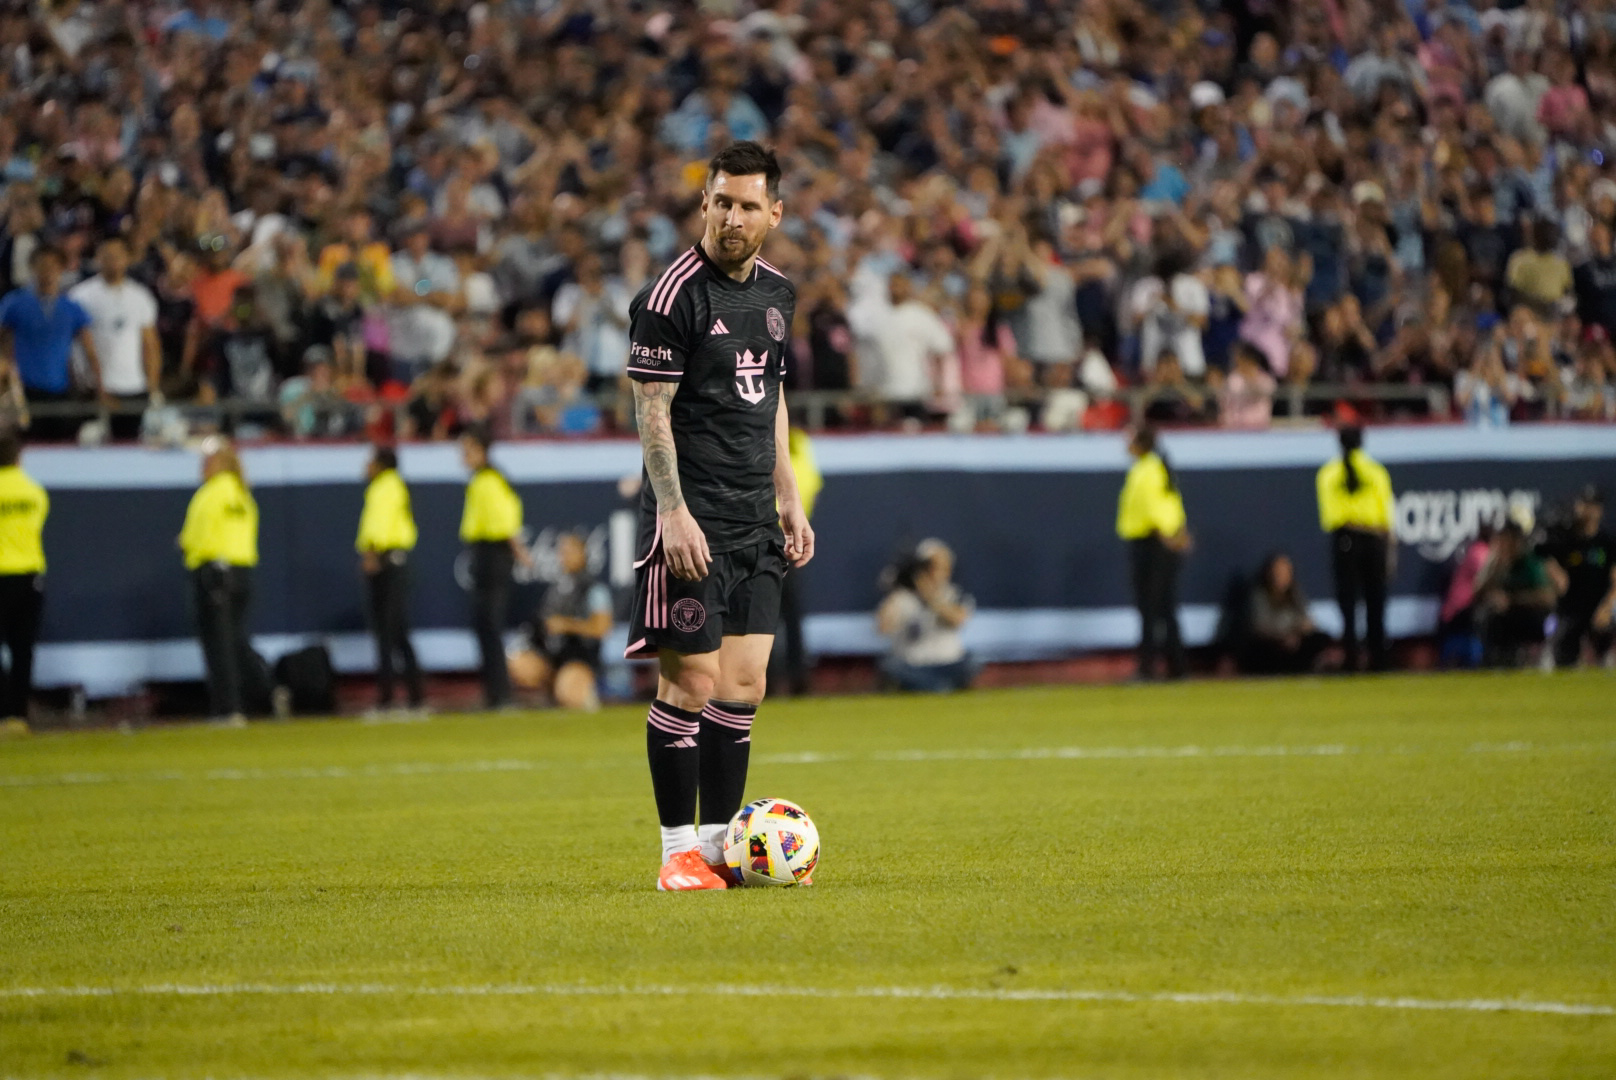 Lionel Messi prepares for a free kick vs Sporting Kansas City in a Major League Soccer match at Arrowhead Stadium.